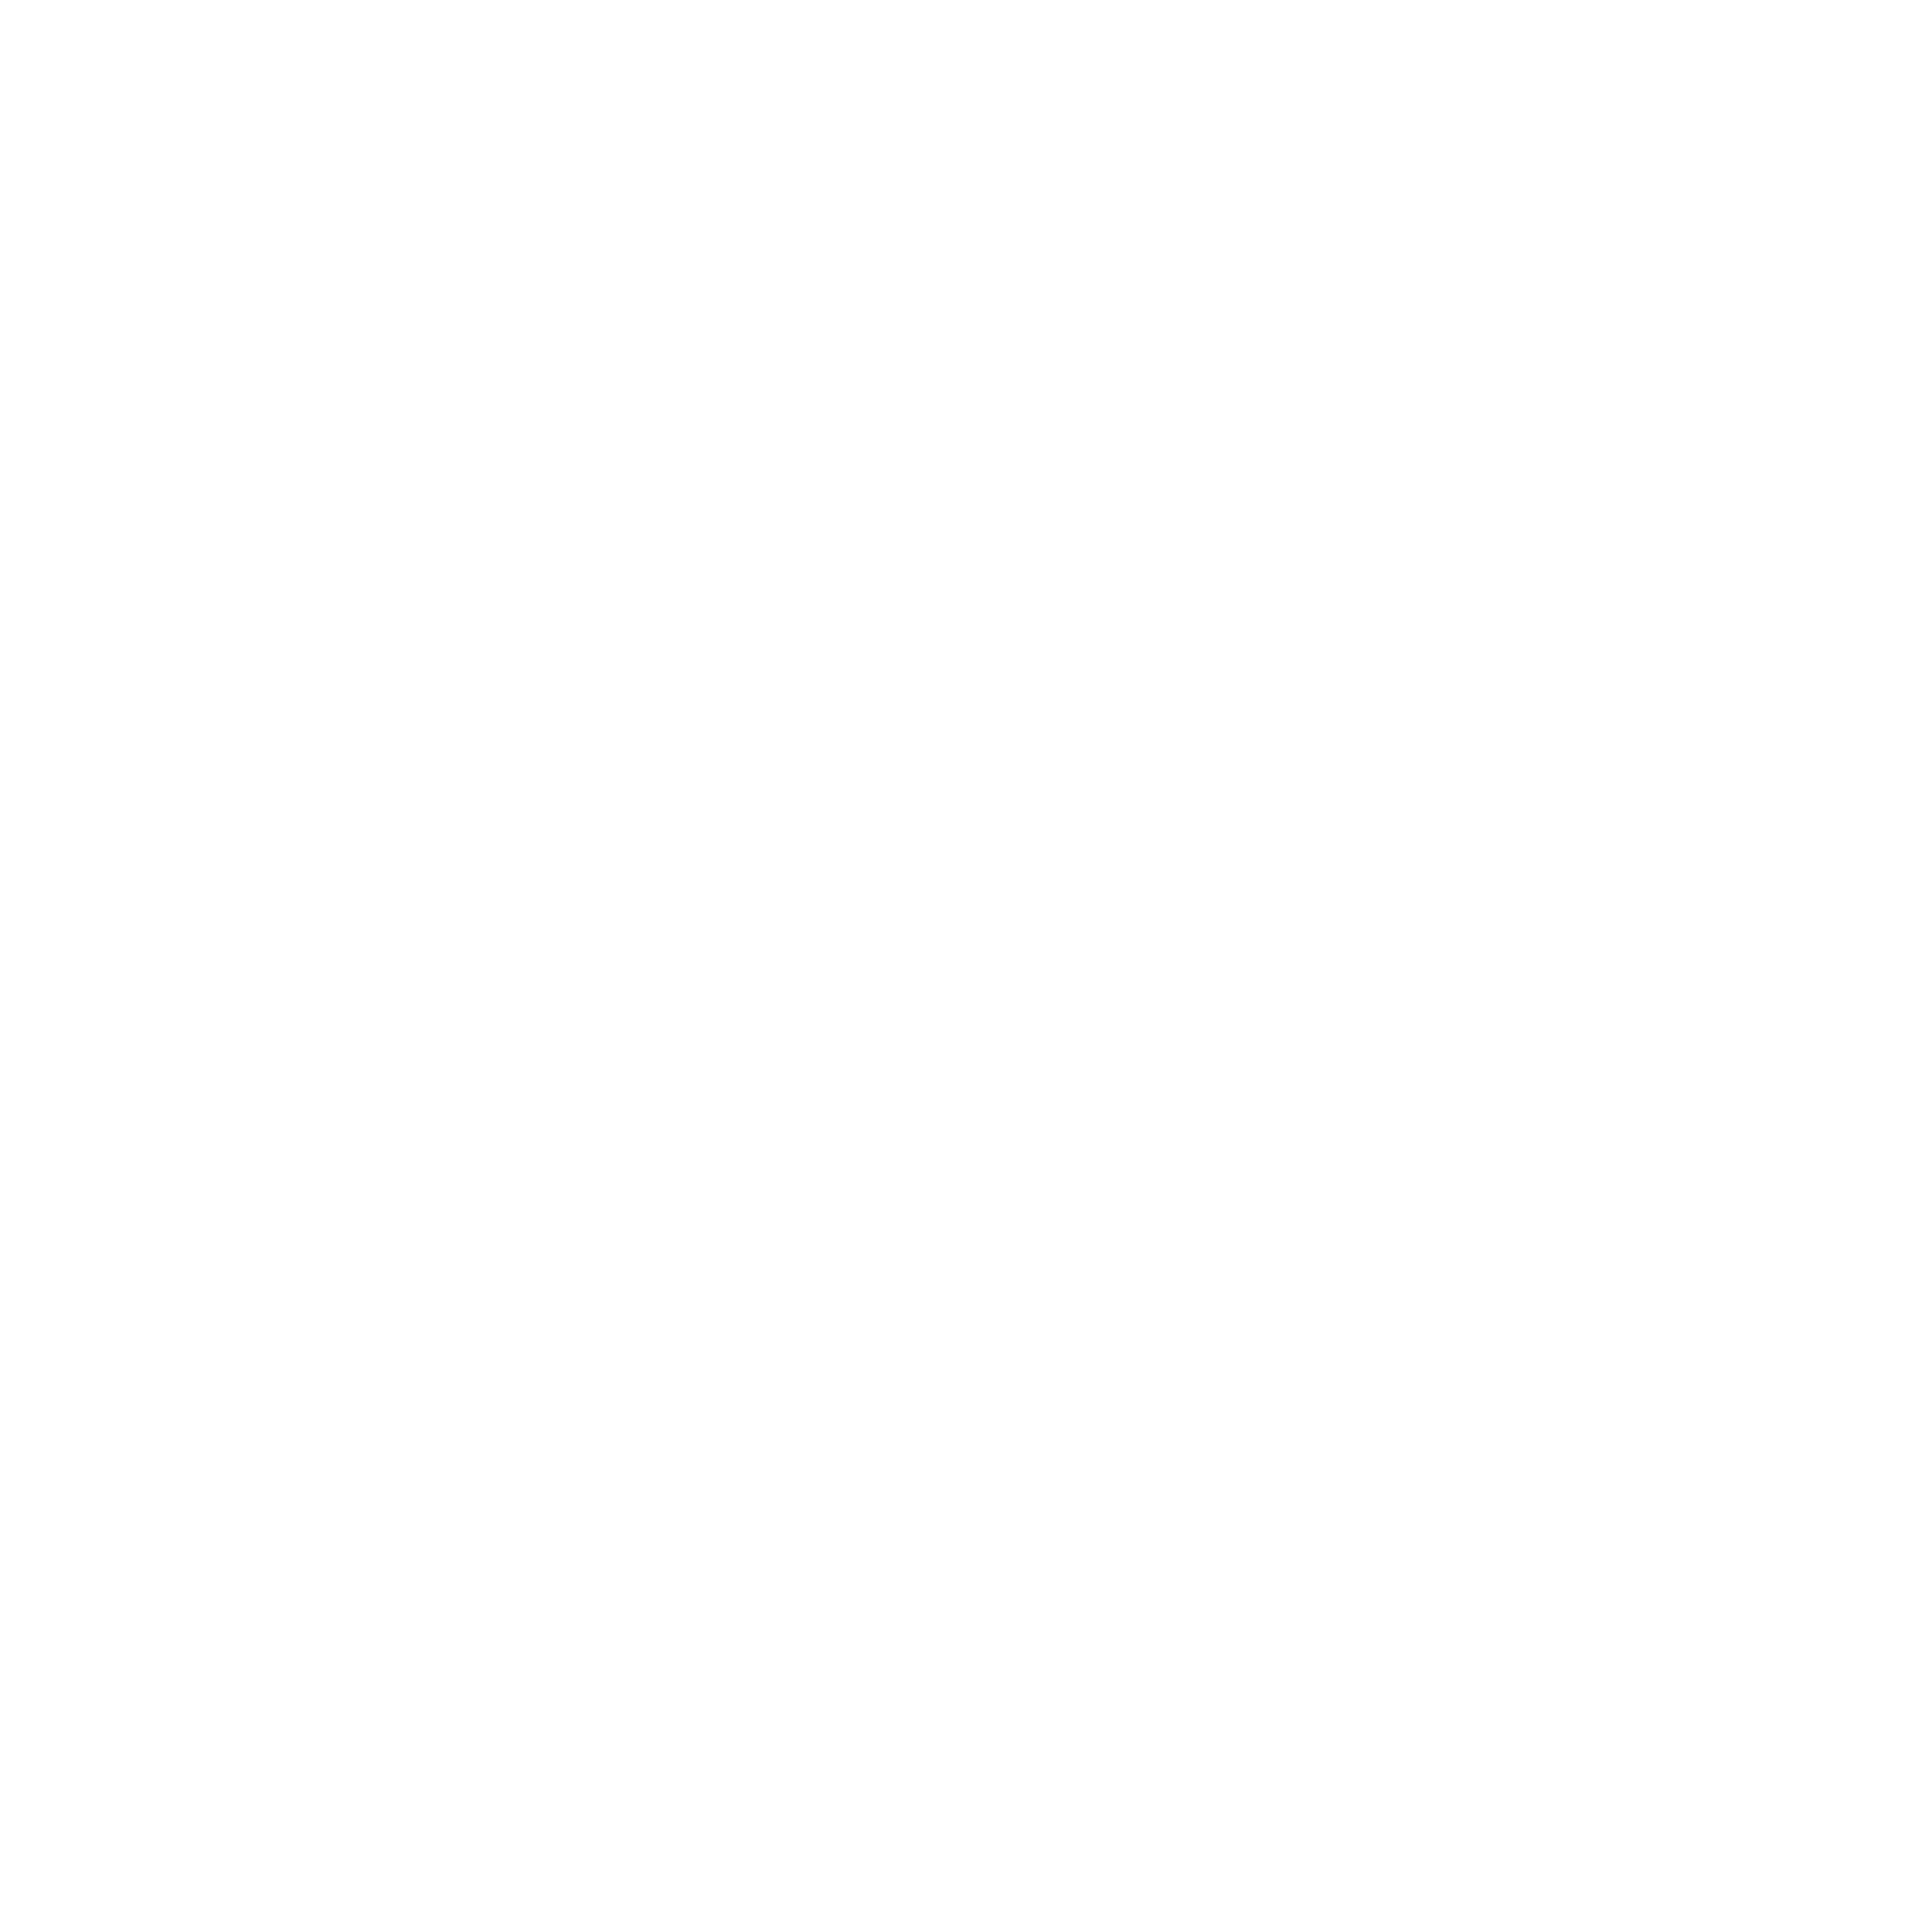 The Mosaic Centre - ADAS Calibrations and Wheel Alignments